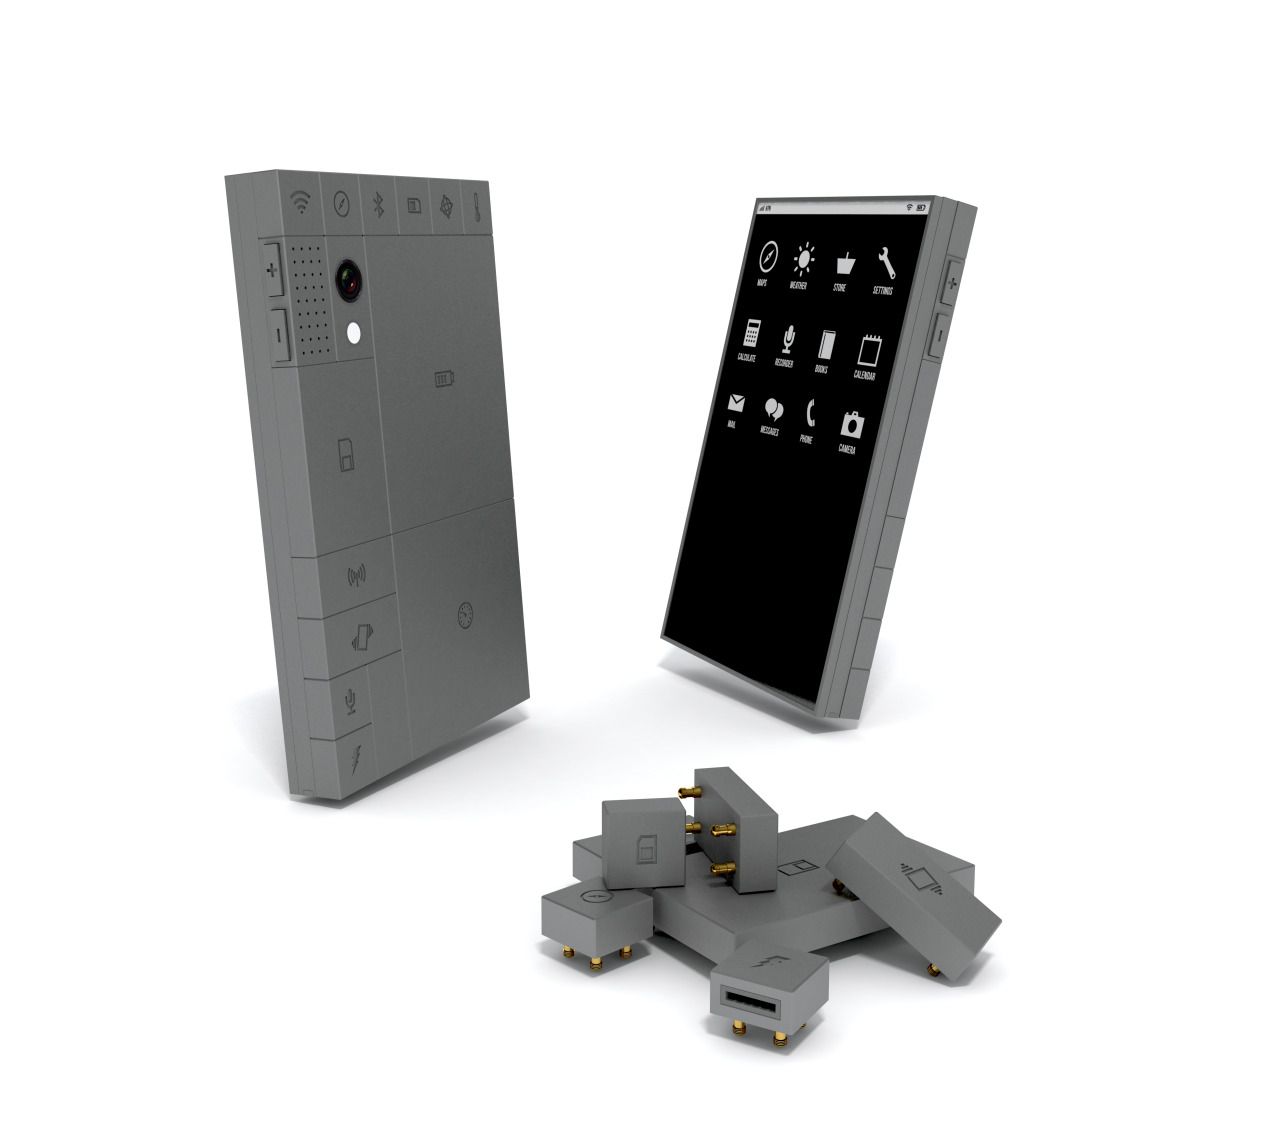 A render of the front, back, and modules of a Phonebloks concept